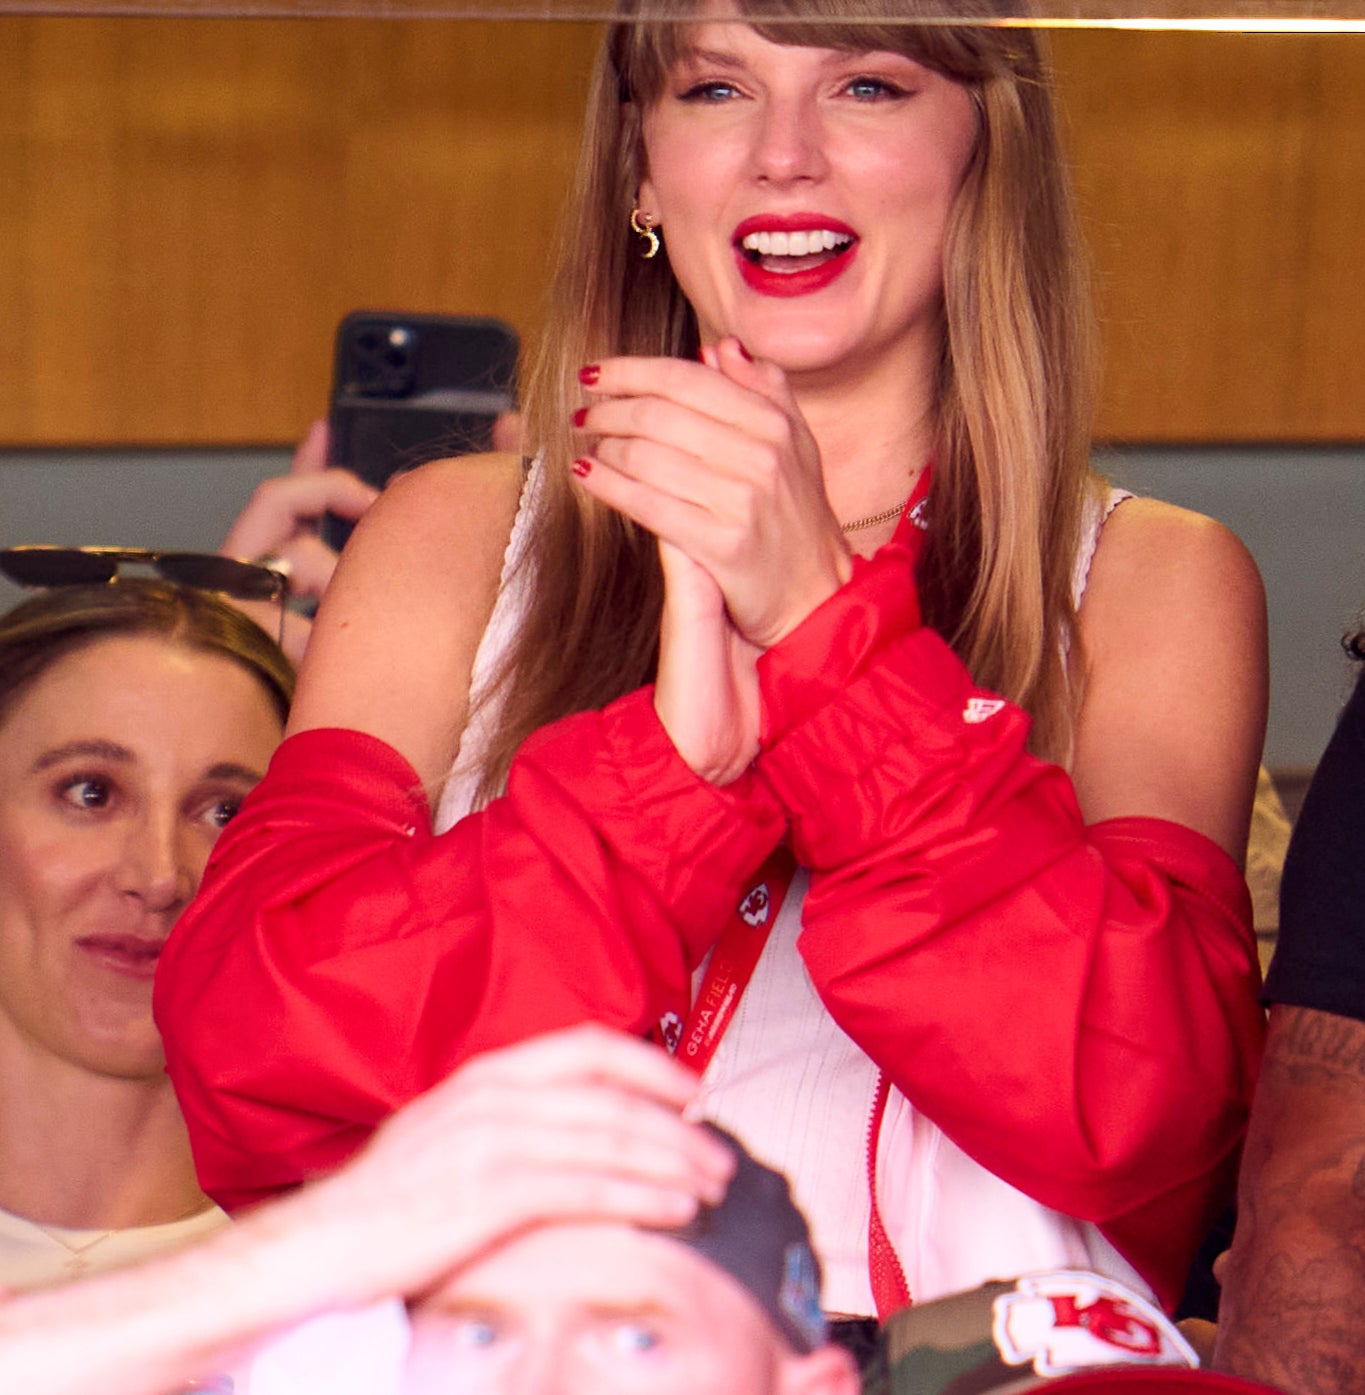 taylor smiling in the vip box